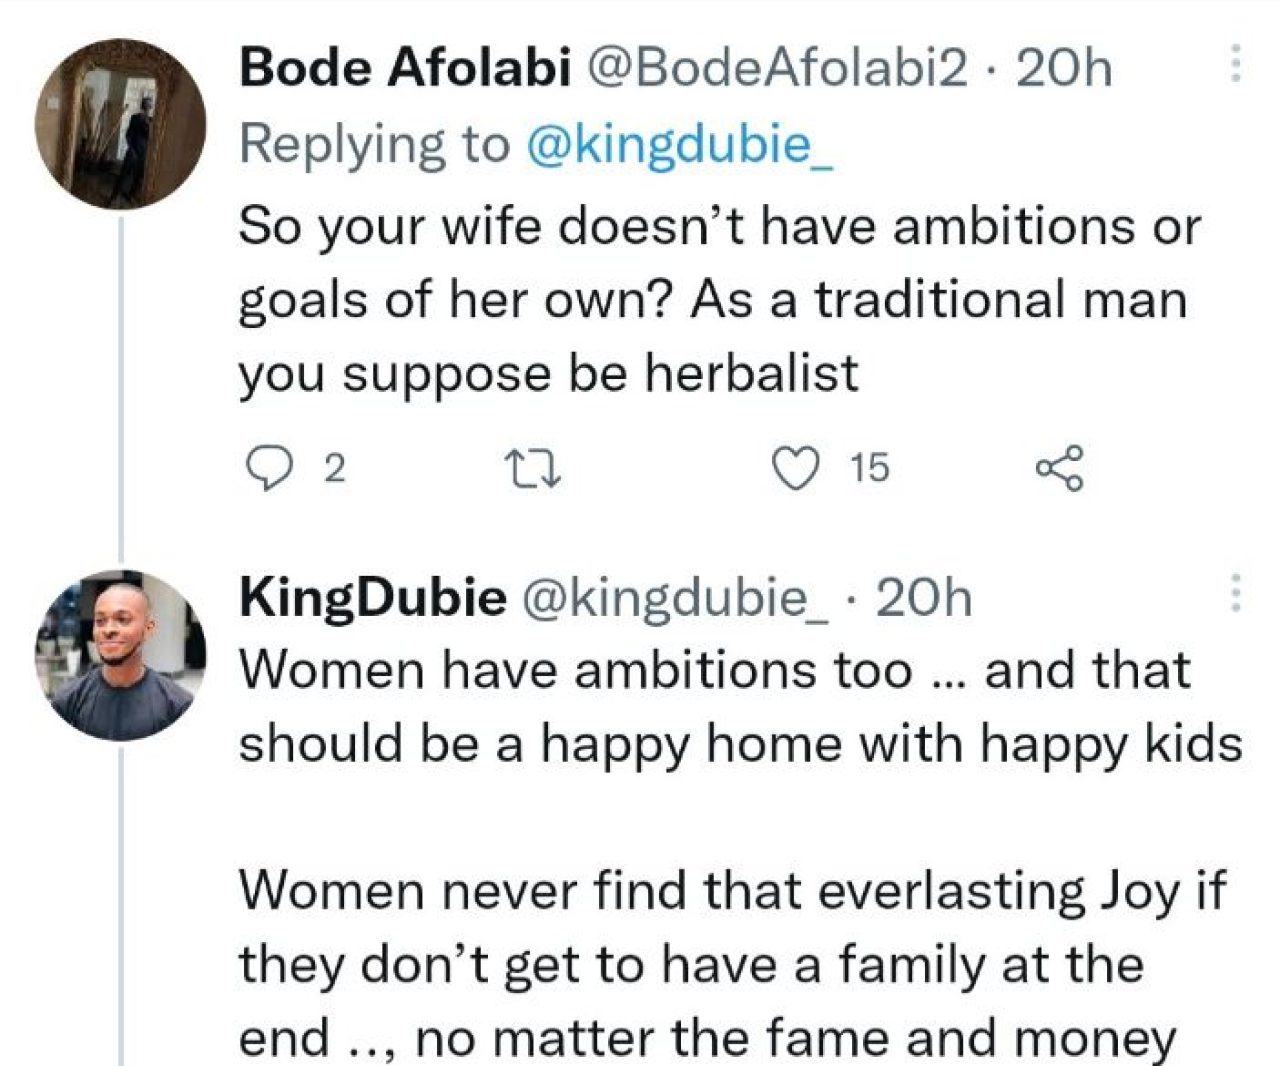 "A happy home with happy children should be the goal of women" Man vows to never permit his wife to work Afro News Wire